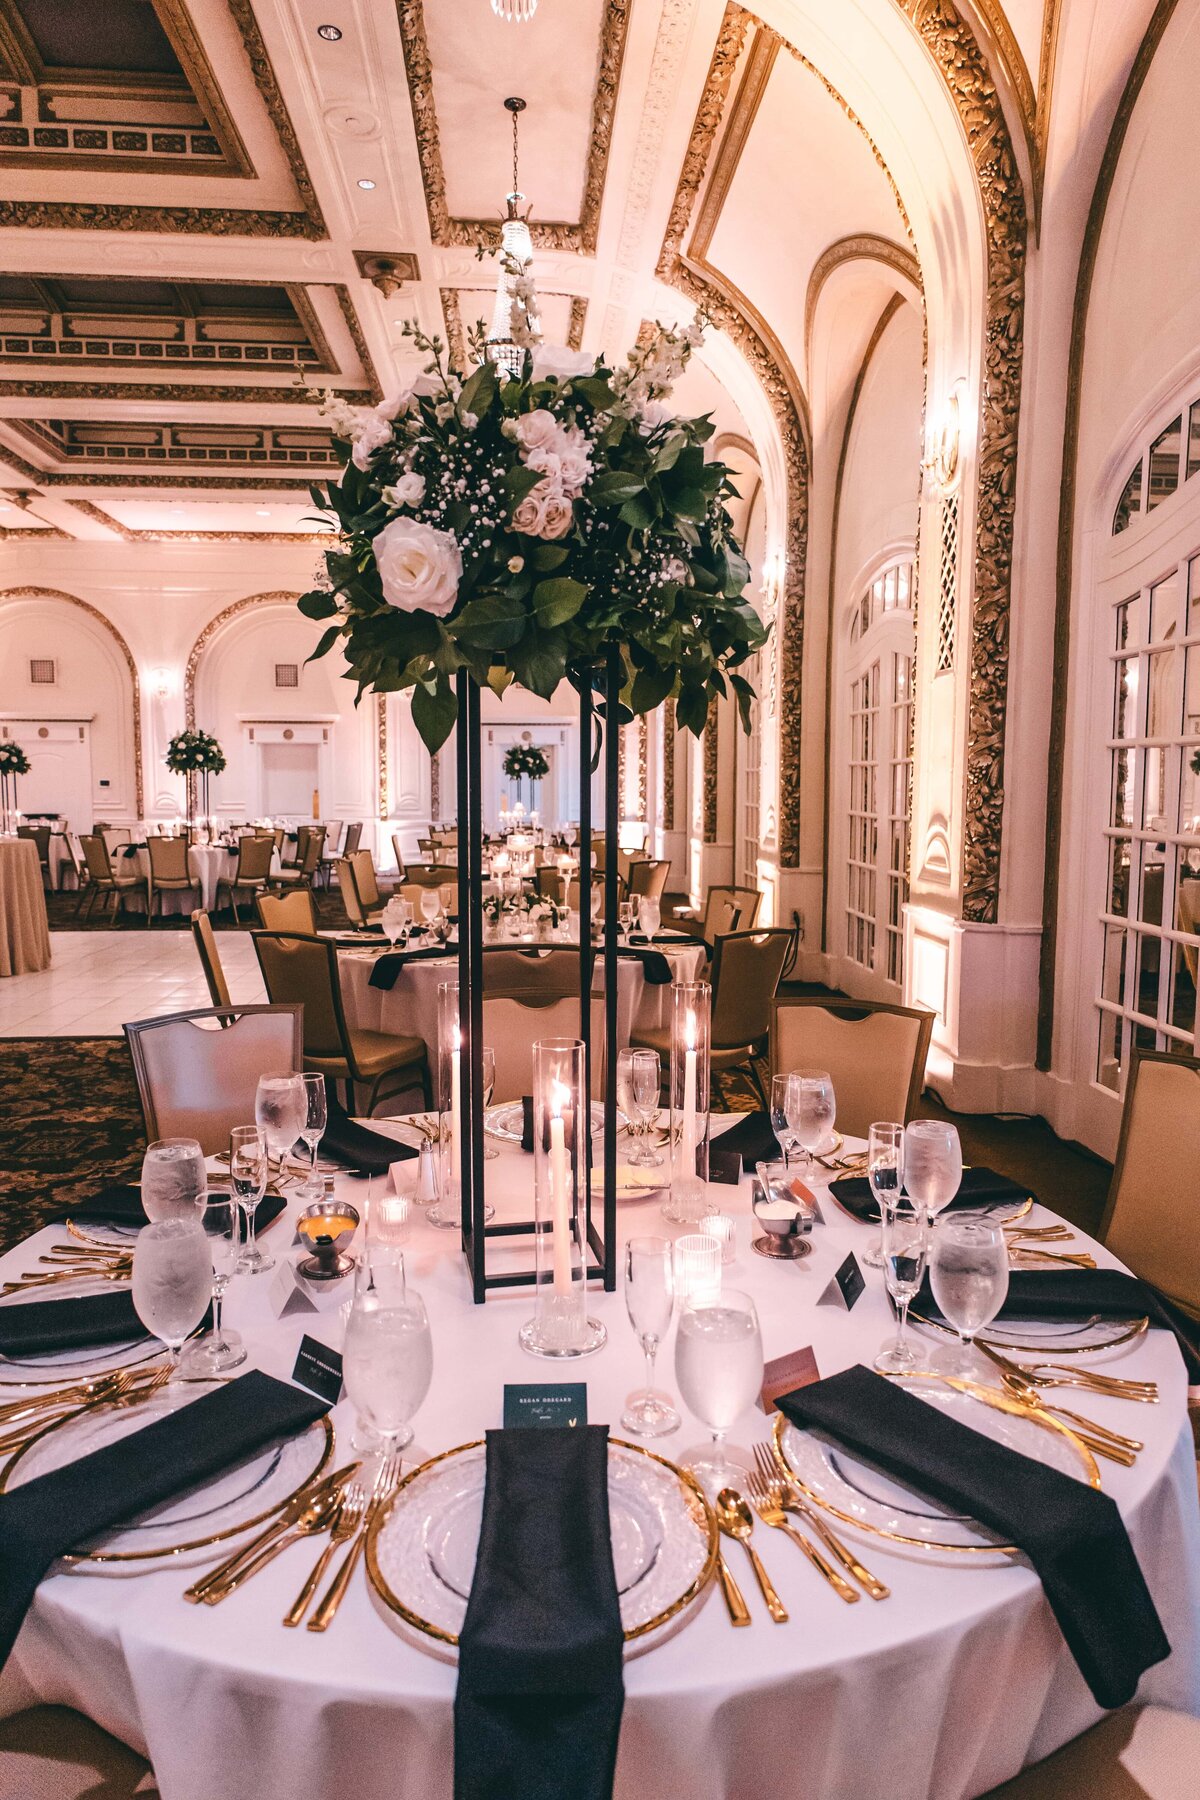 Elegant banquet hall setup, designed by a top wedding planner in Des Moines, with a large floral centerpiece on a table, surrounded by candles, fine china, and gold cutlery. Ornate